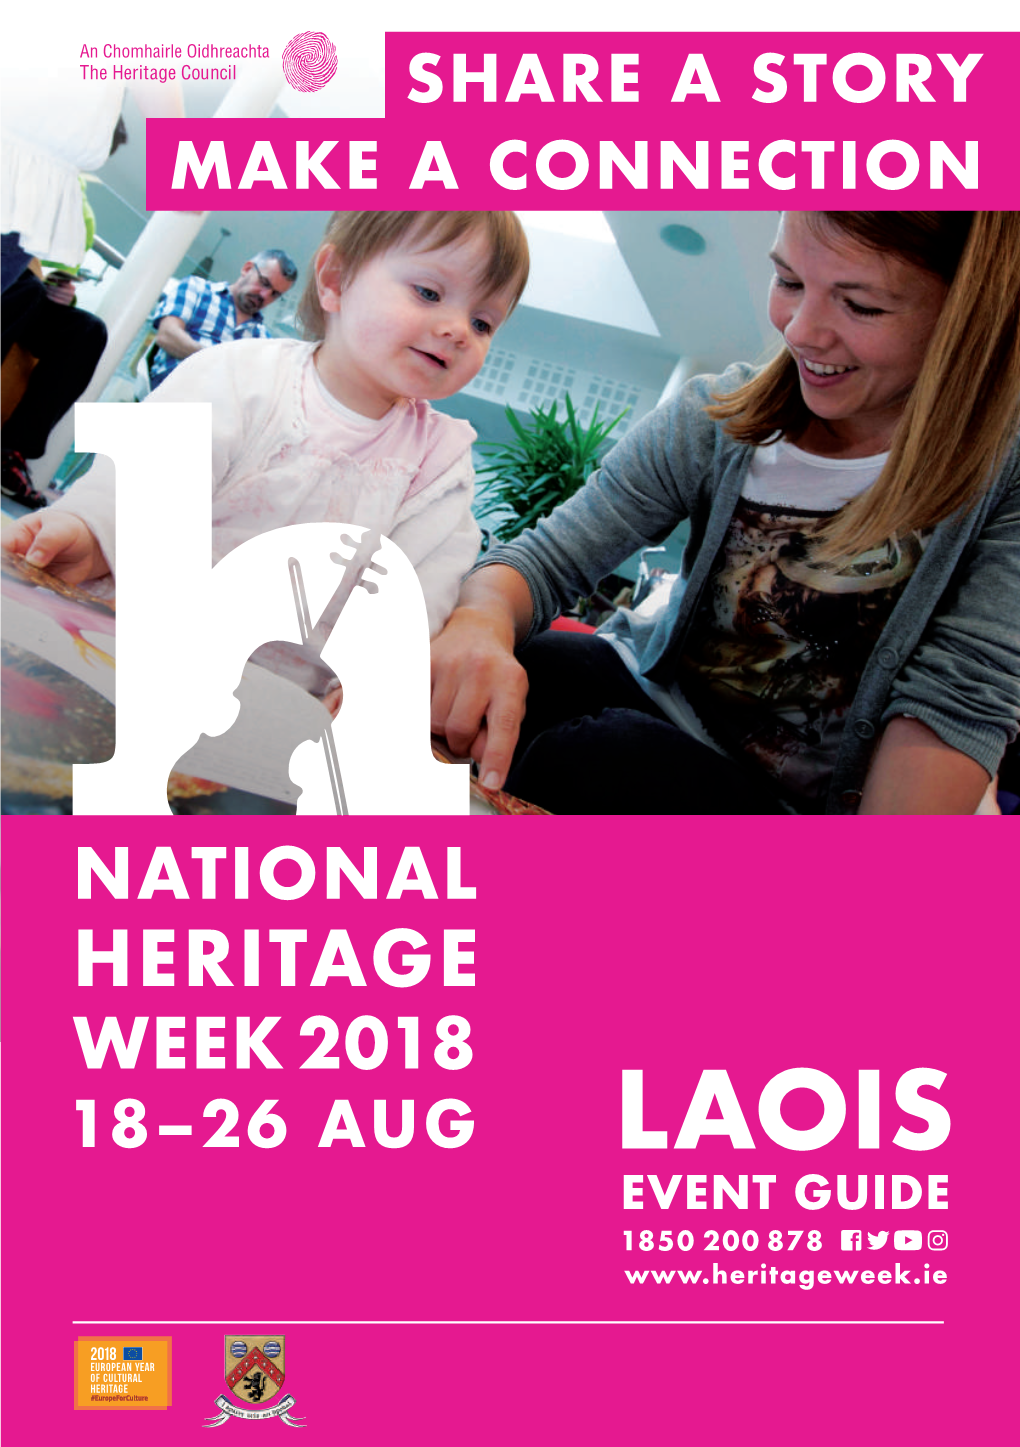 Laois Passport a New Laois Passport Has Been Published to Encourage Everyone to Explore the Wonderful Heritage of Laois This Summer